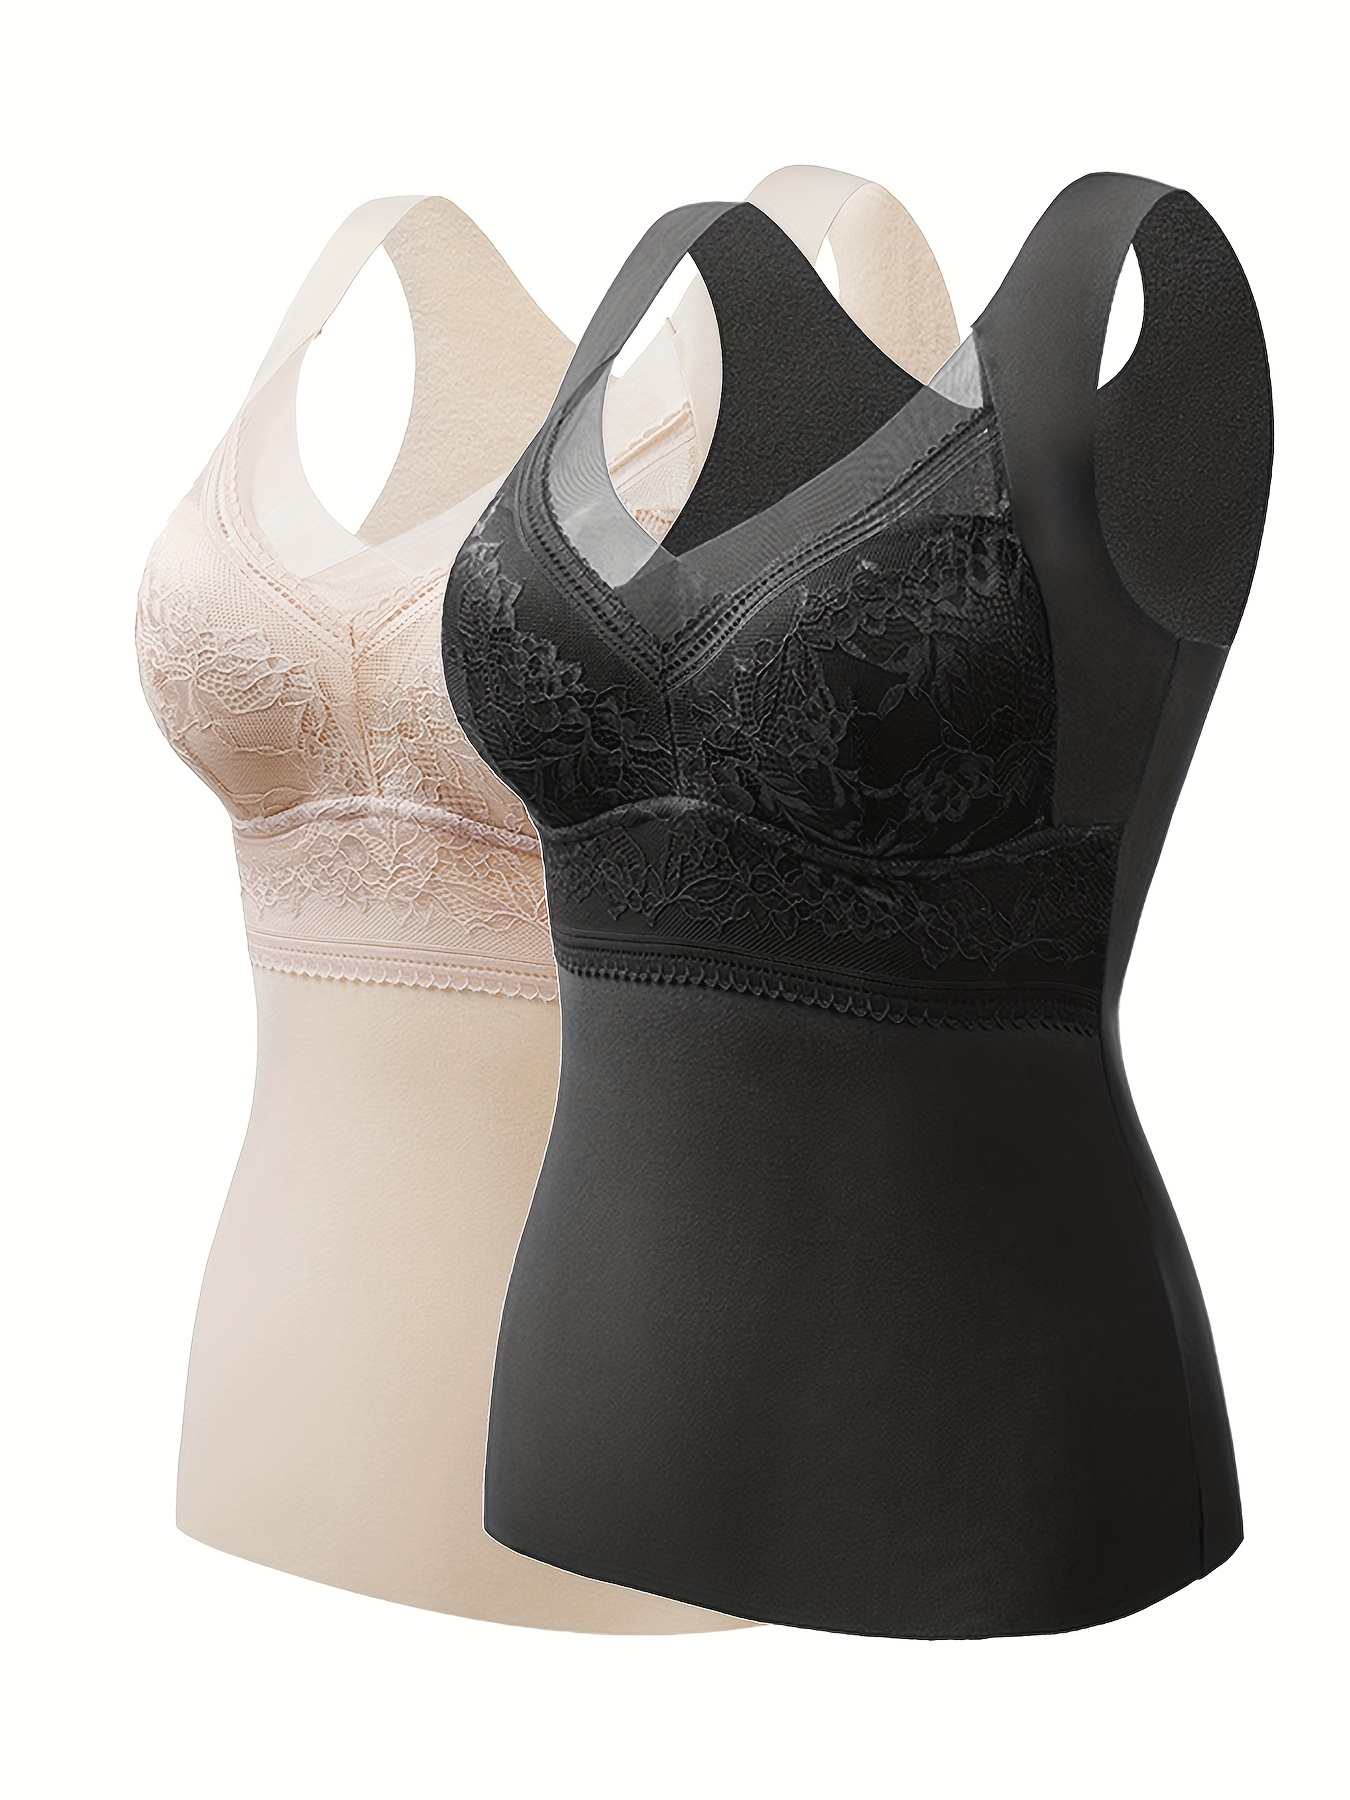 2pcs 2-in-1 Built-in Bra Thermal Tank Top, Lace Decor Carefree Warm Sports  Sleeveless Top, Women's Clothing